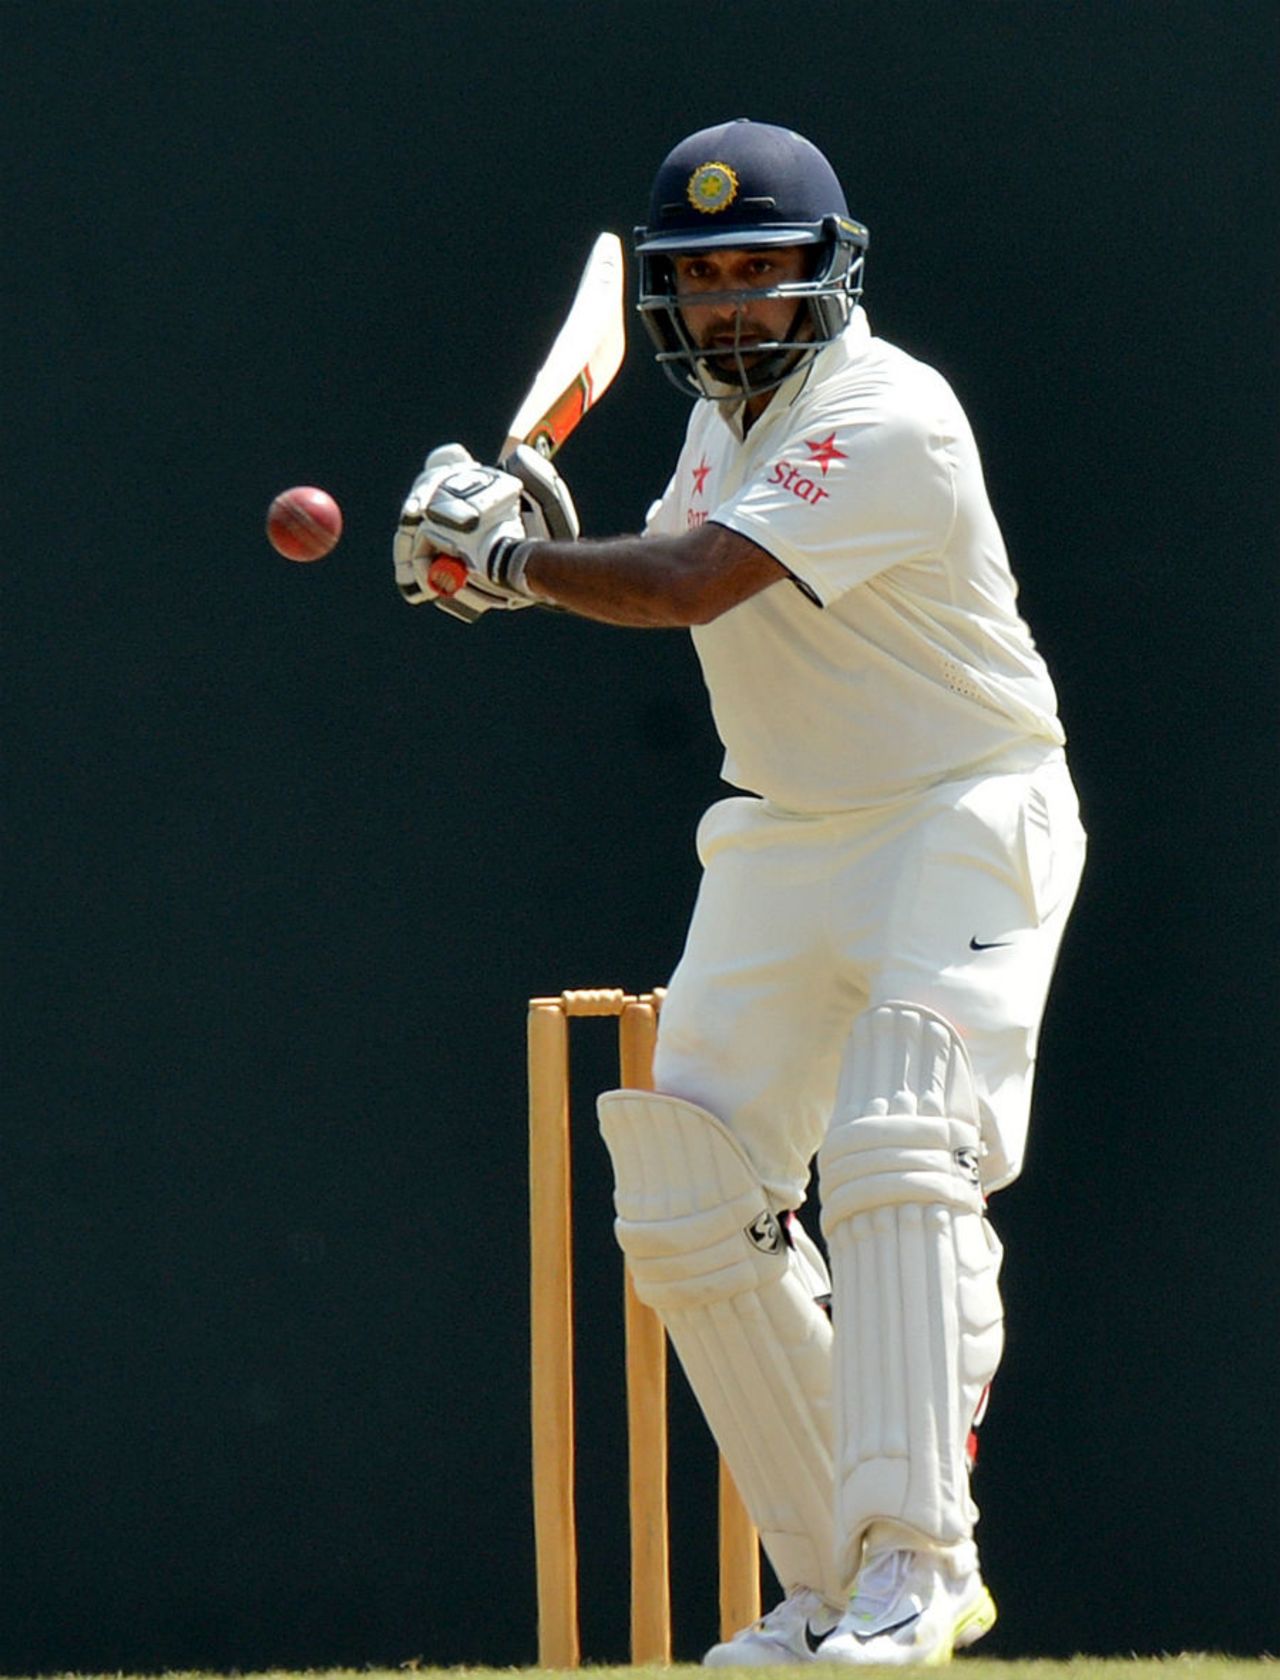 Amit Mishra shapes up to play a short delivery, Sri Lanka Board President's XI v Indians, Colombo, 3rd day, August 8, 2015